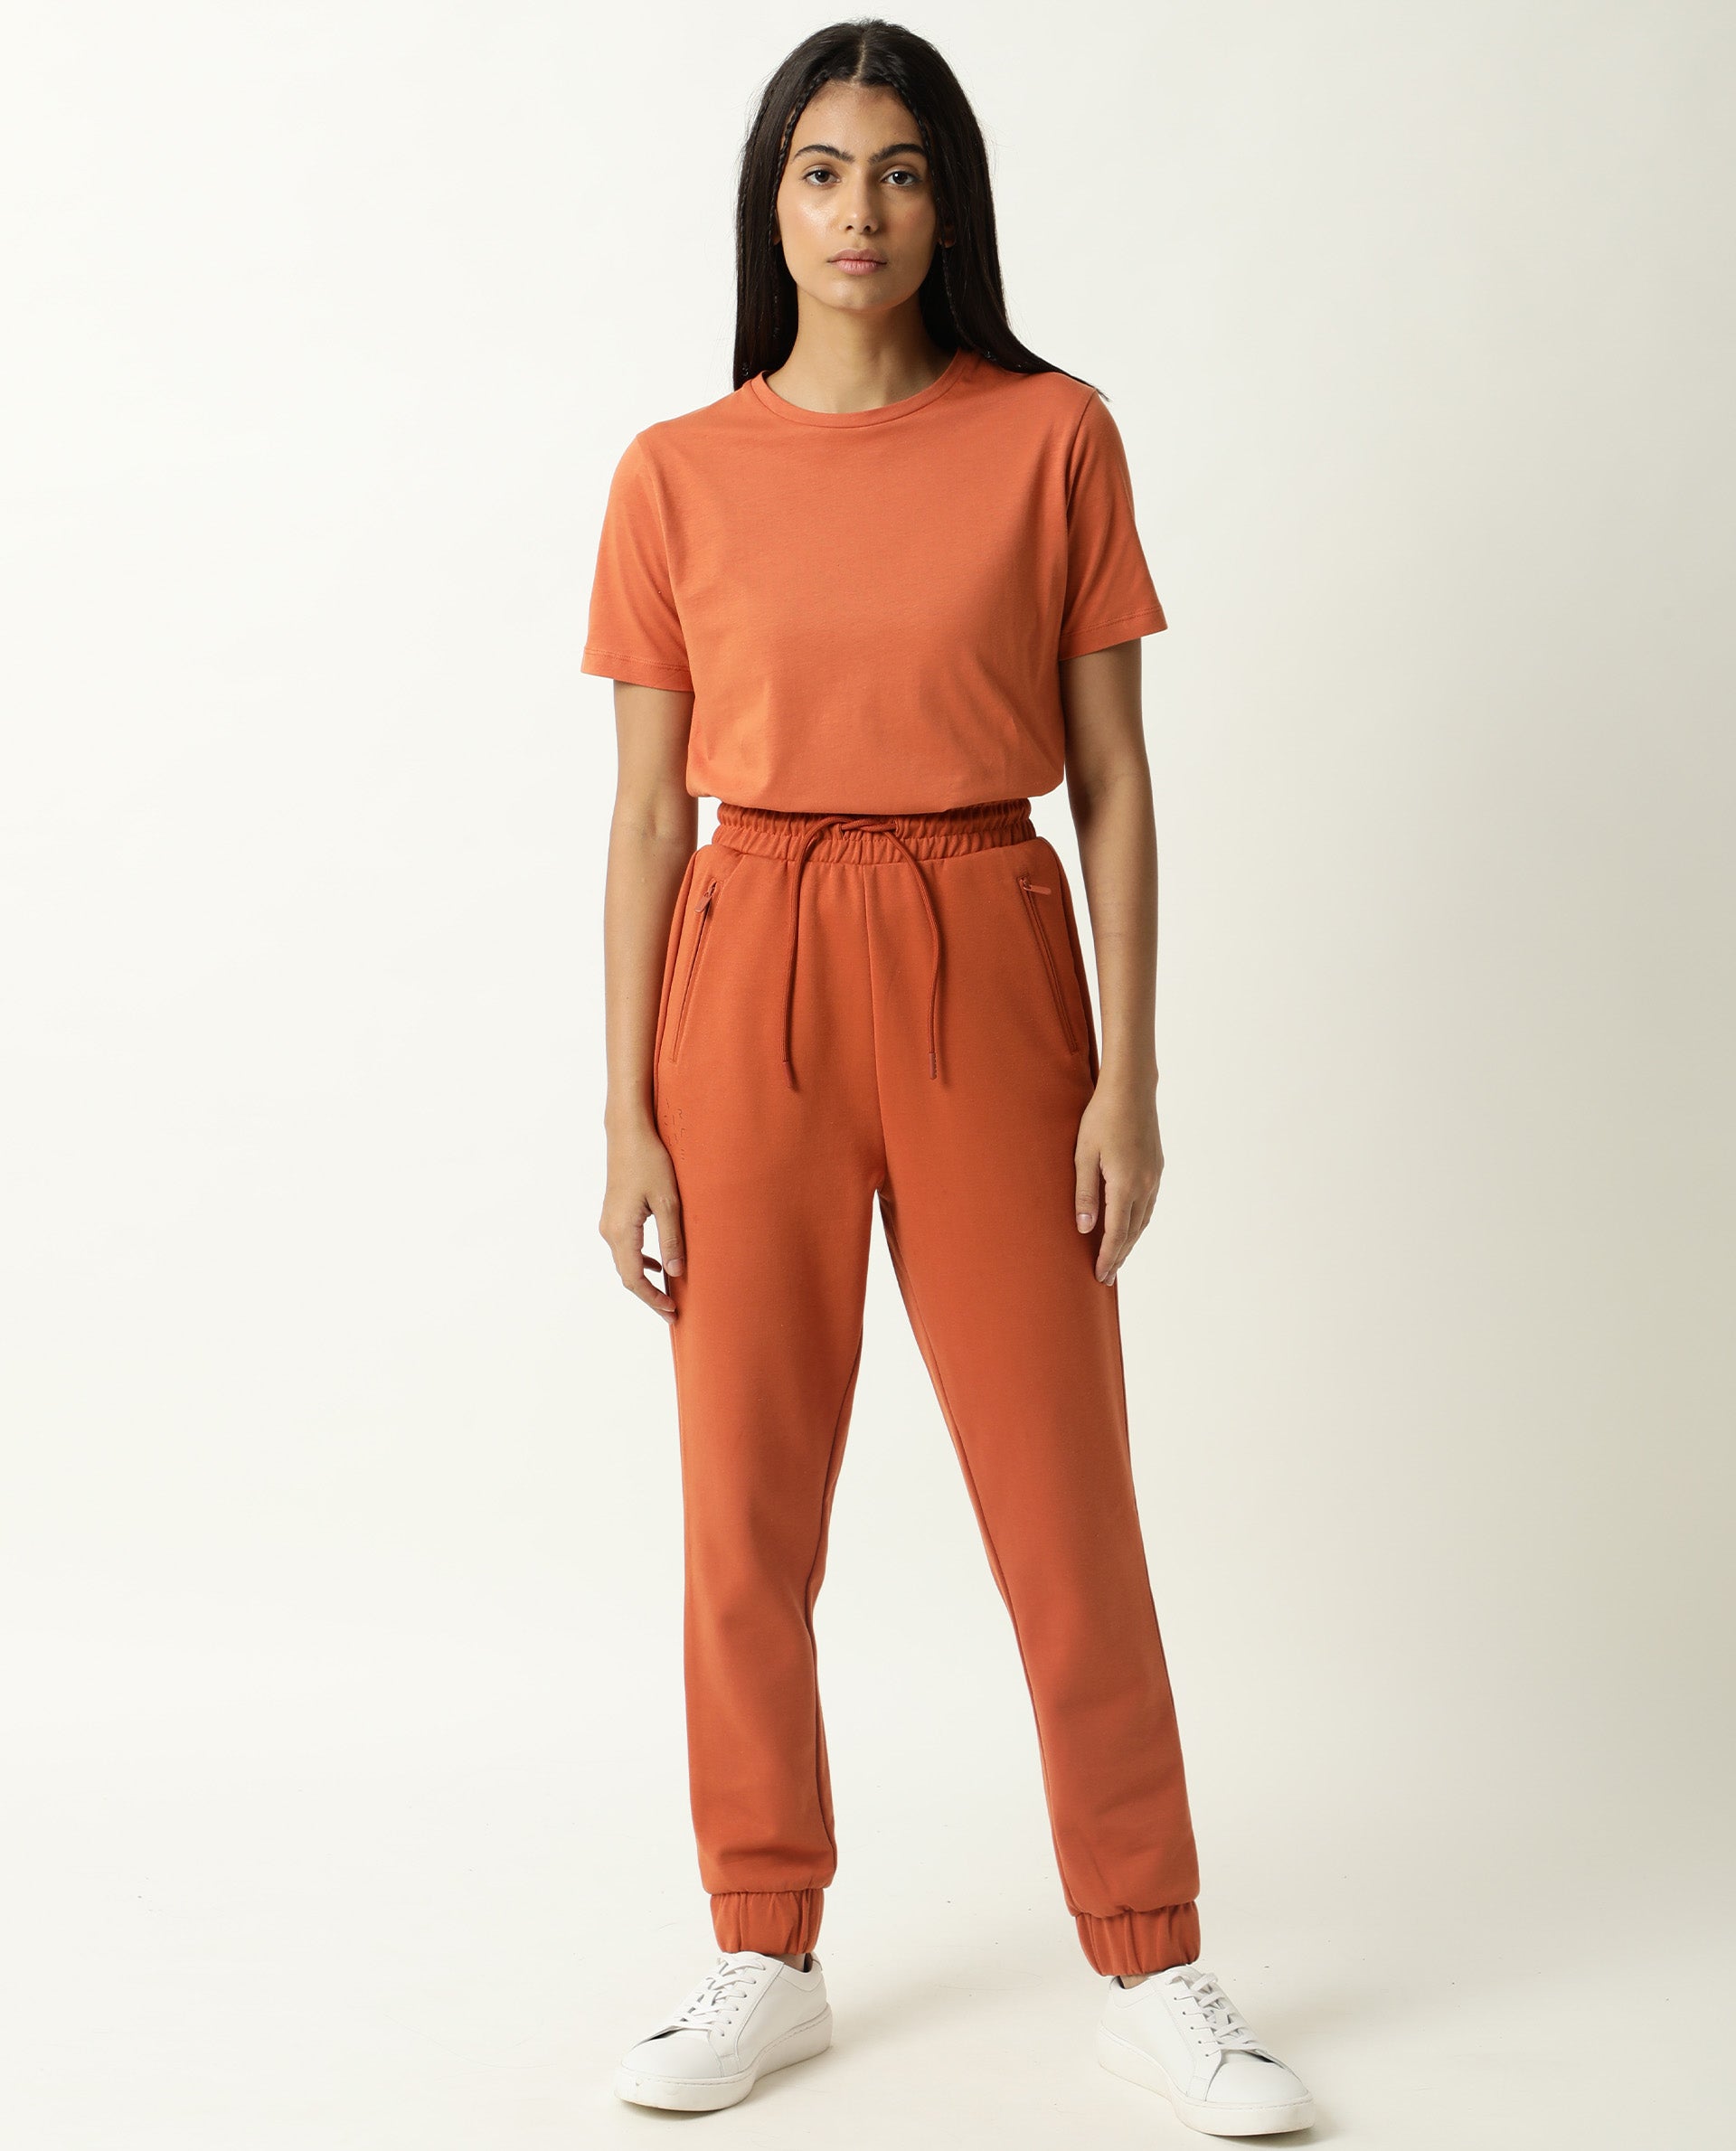 OASIS - SET OF TWO (TOP + TRACK PANTS)